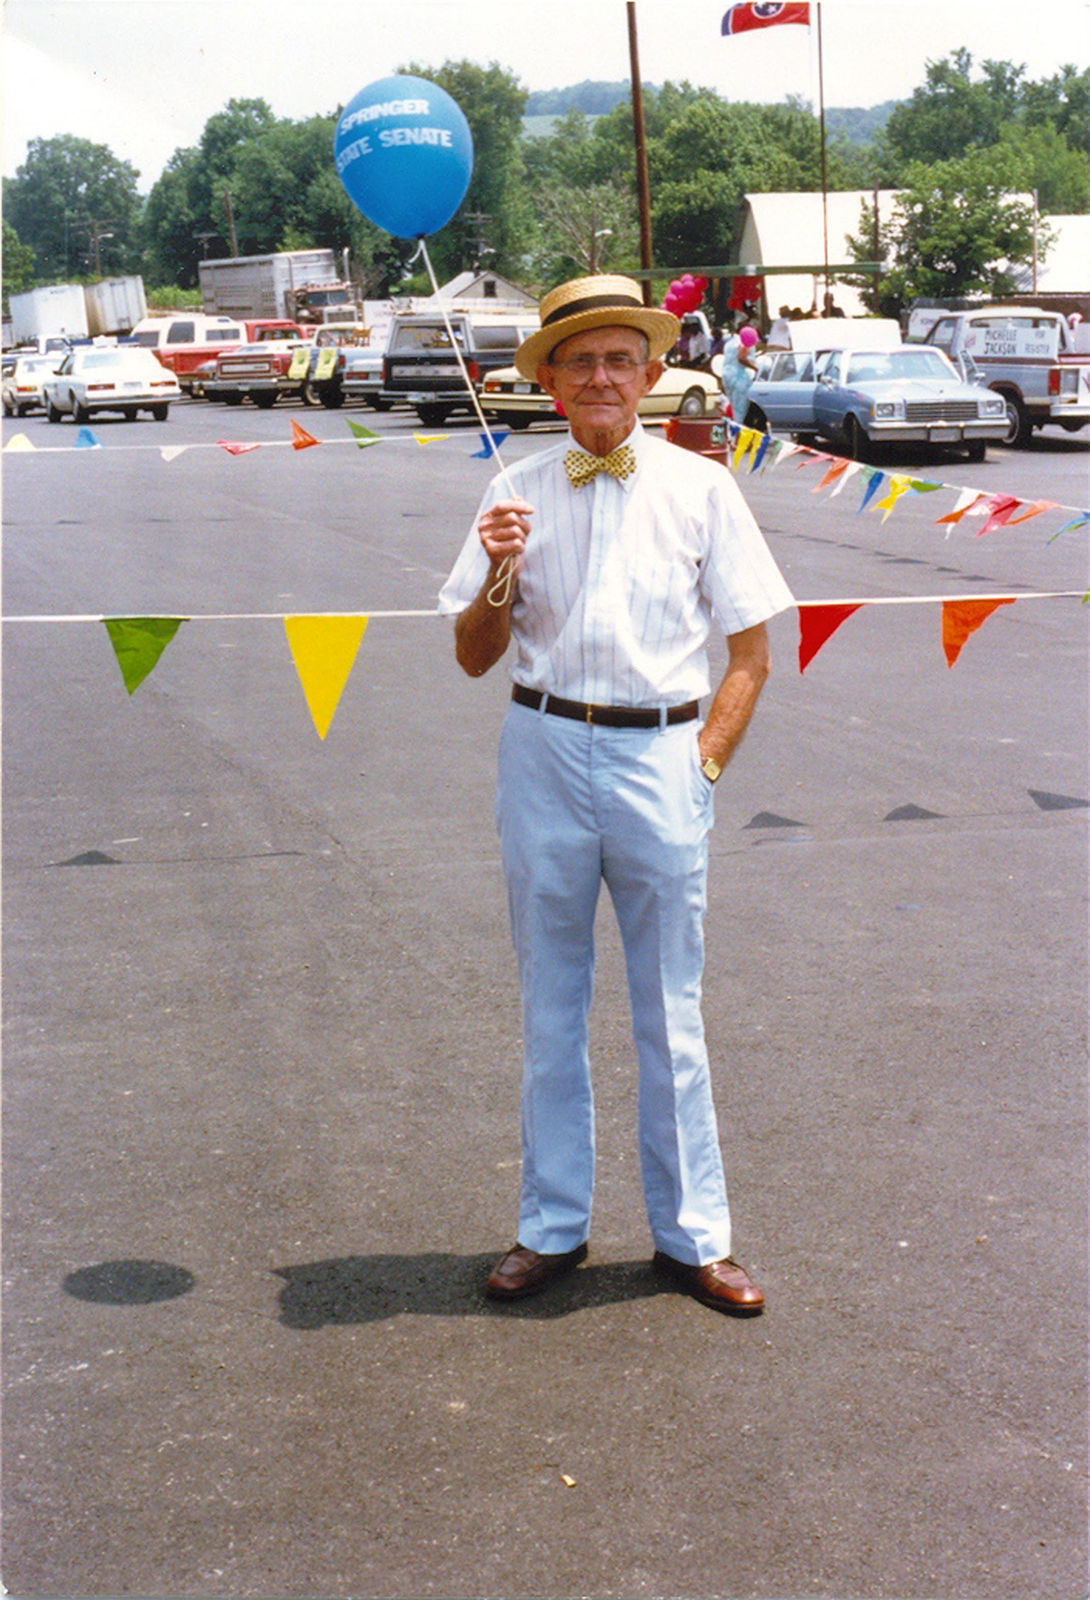 Colonel's dad standing on asphalt holding a blue balloon and wearing a bowtie and carnival barker's hat